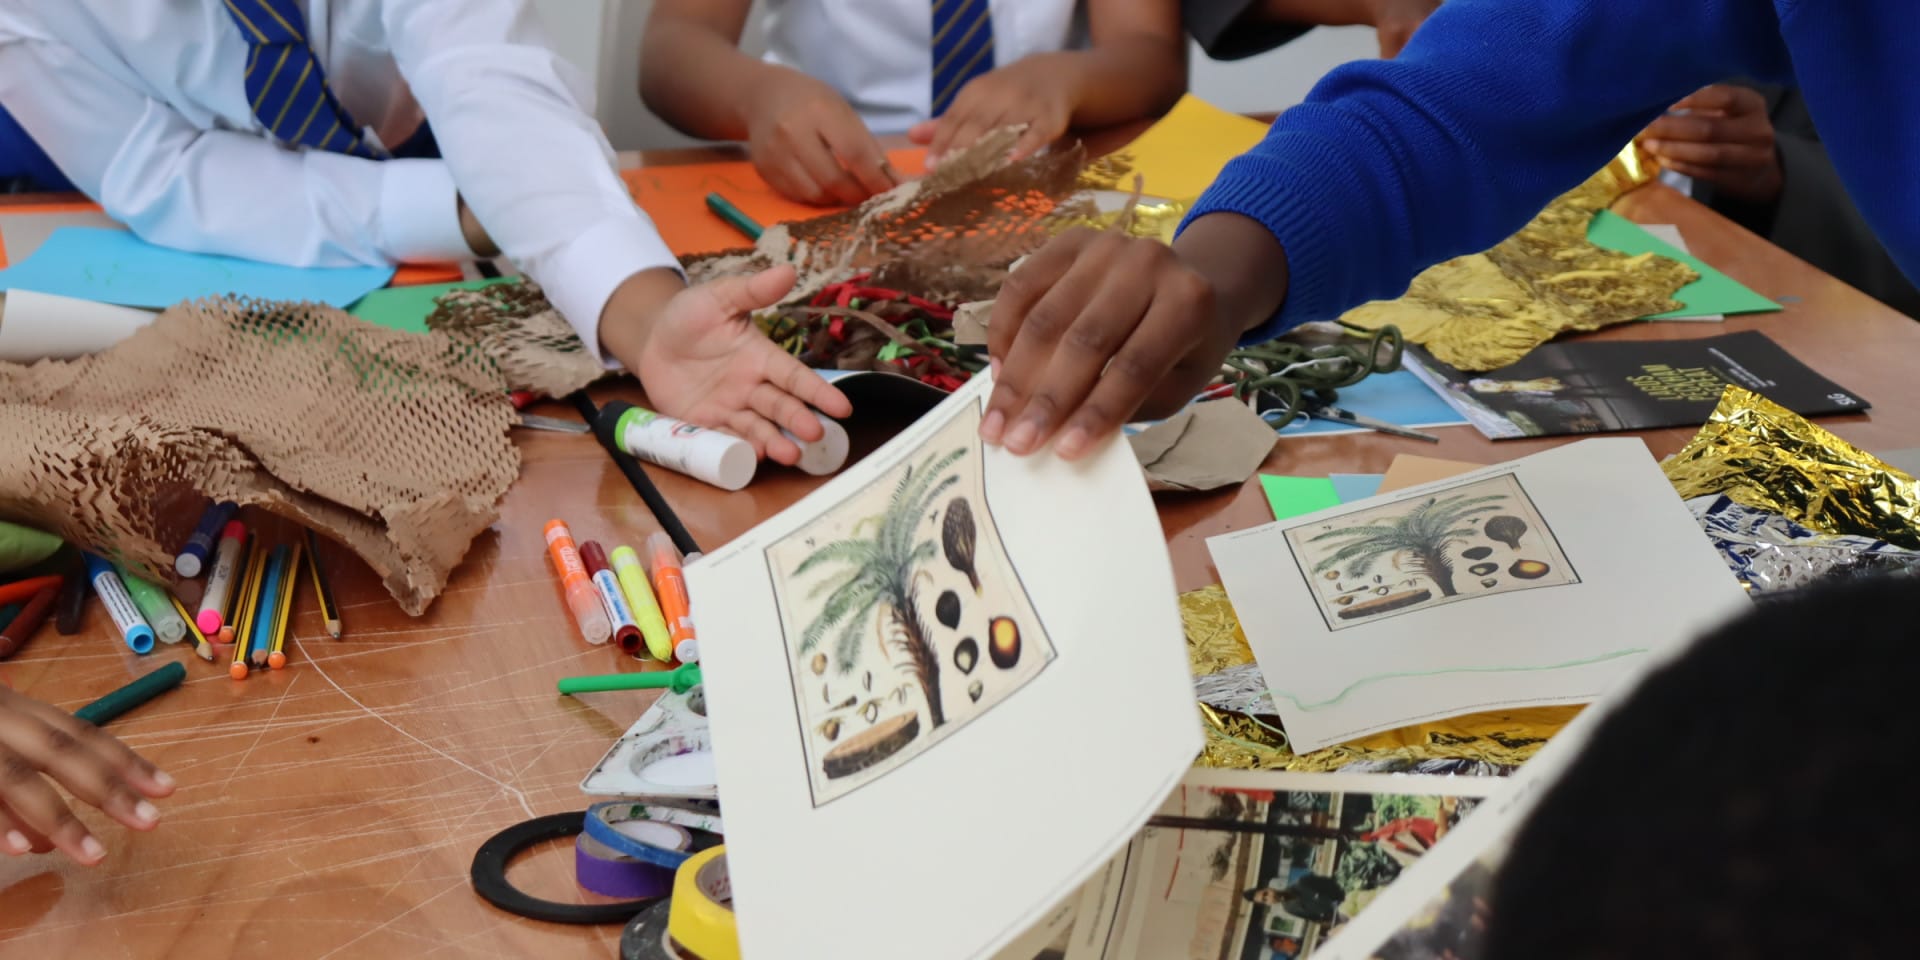 School children engaging with creative materials